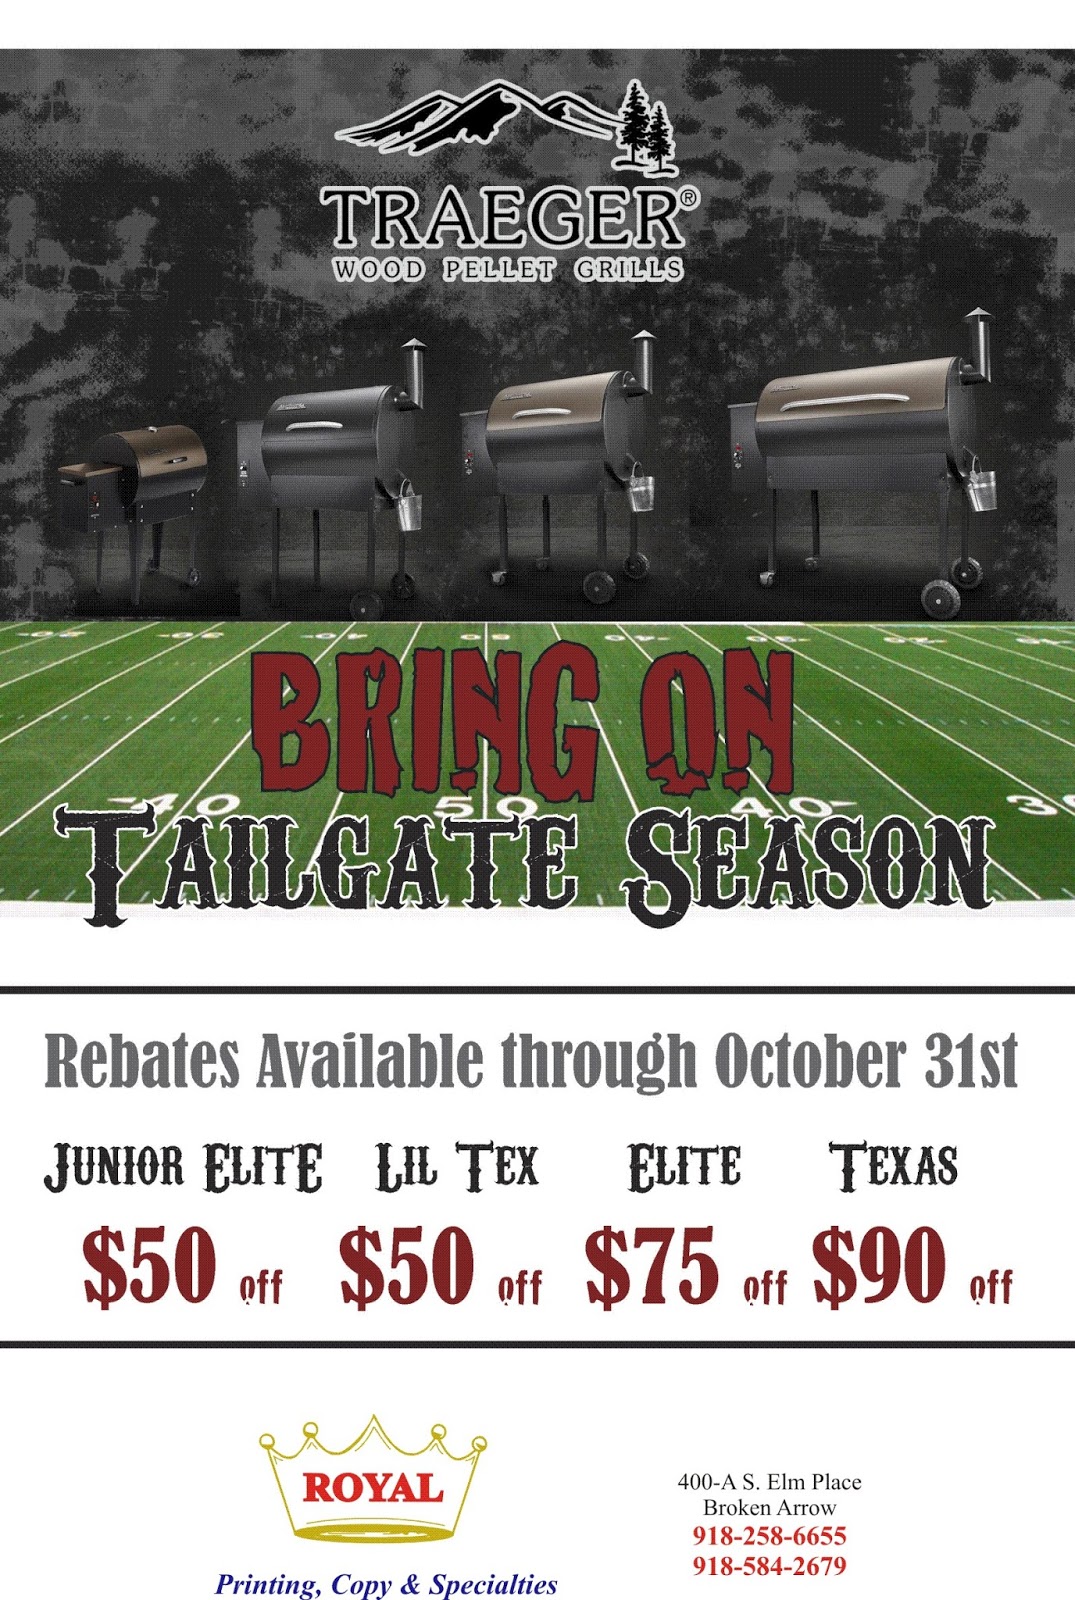 Traeger Grills August 2013